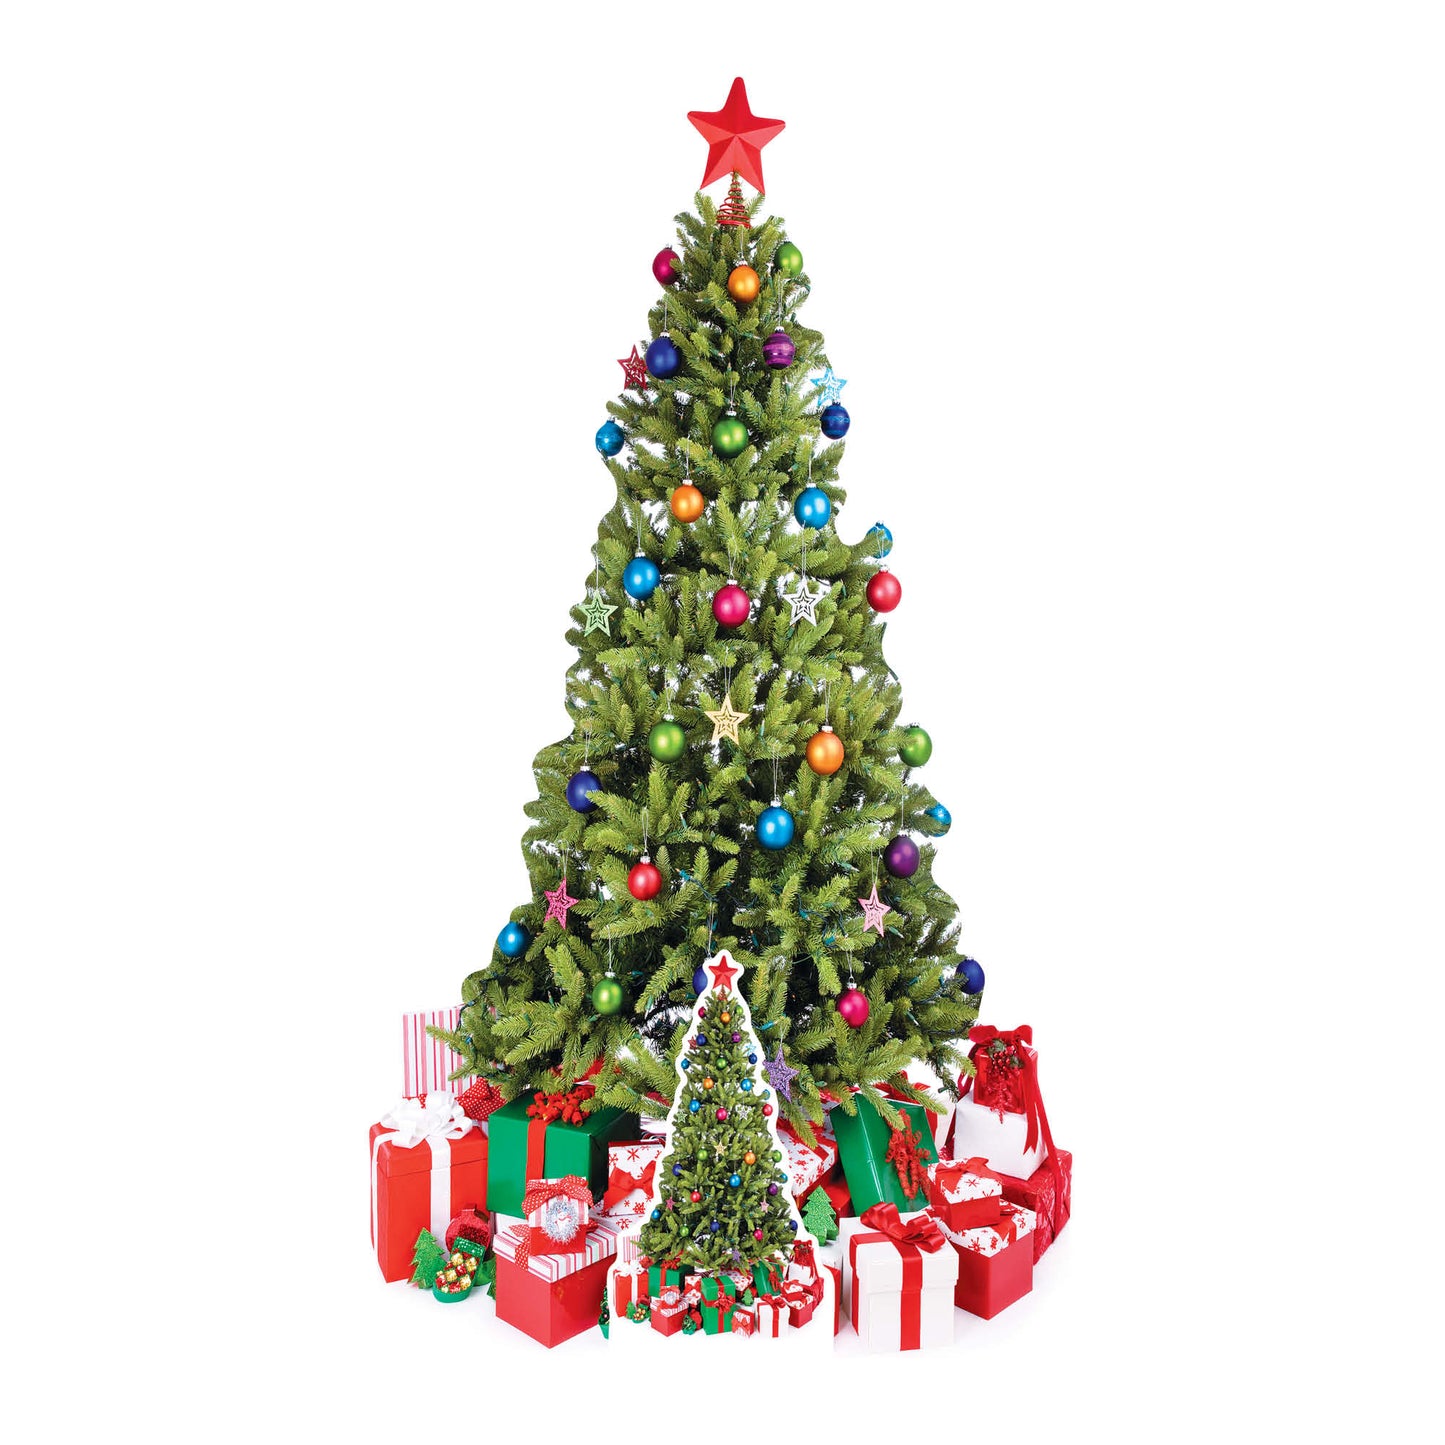 SC057 Christmas Tree Cardboard Cut Out Height 178cm - Star Cutouts